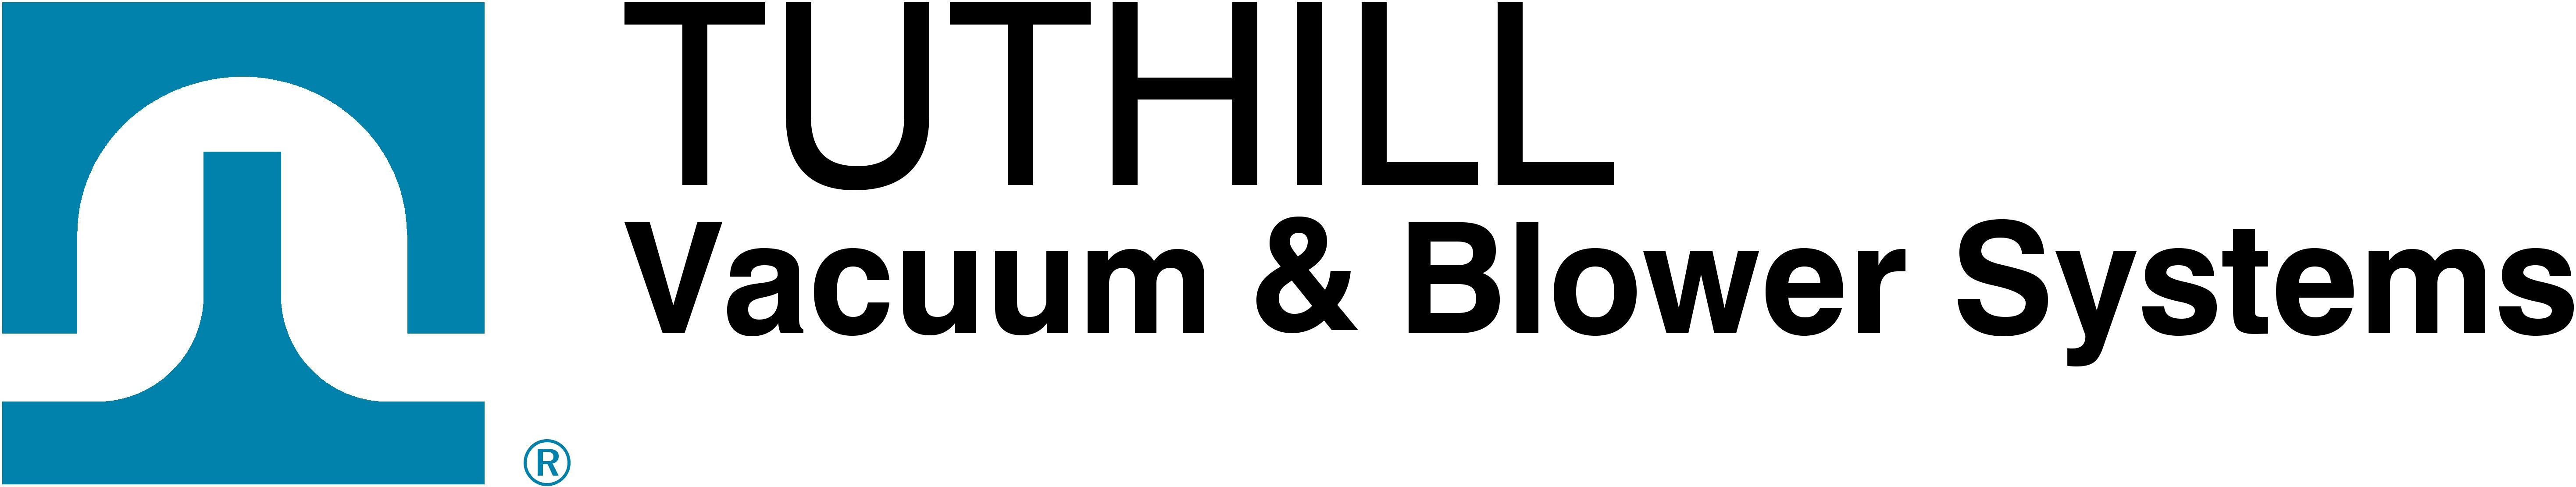 Tuthill Vaccum & Blower System